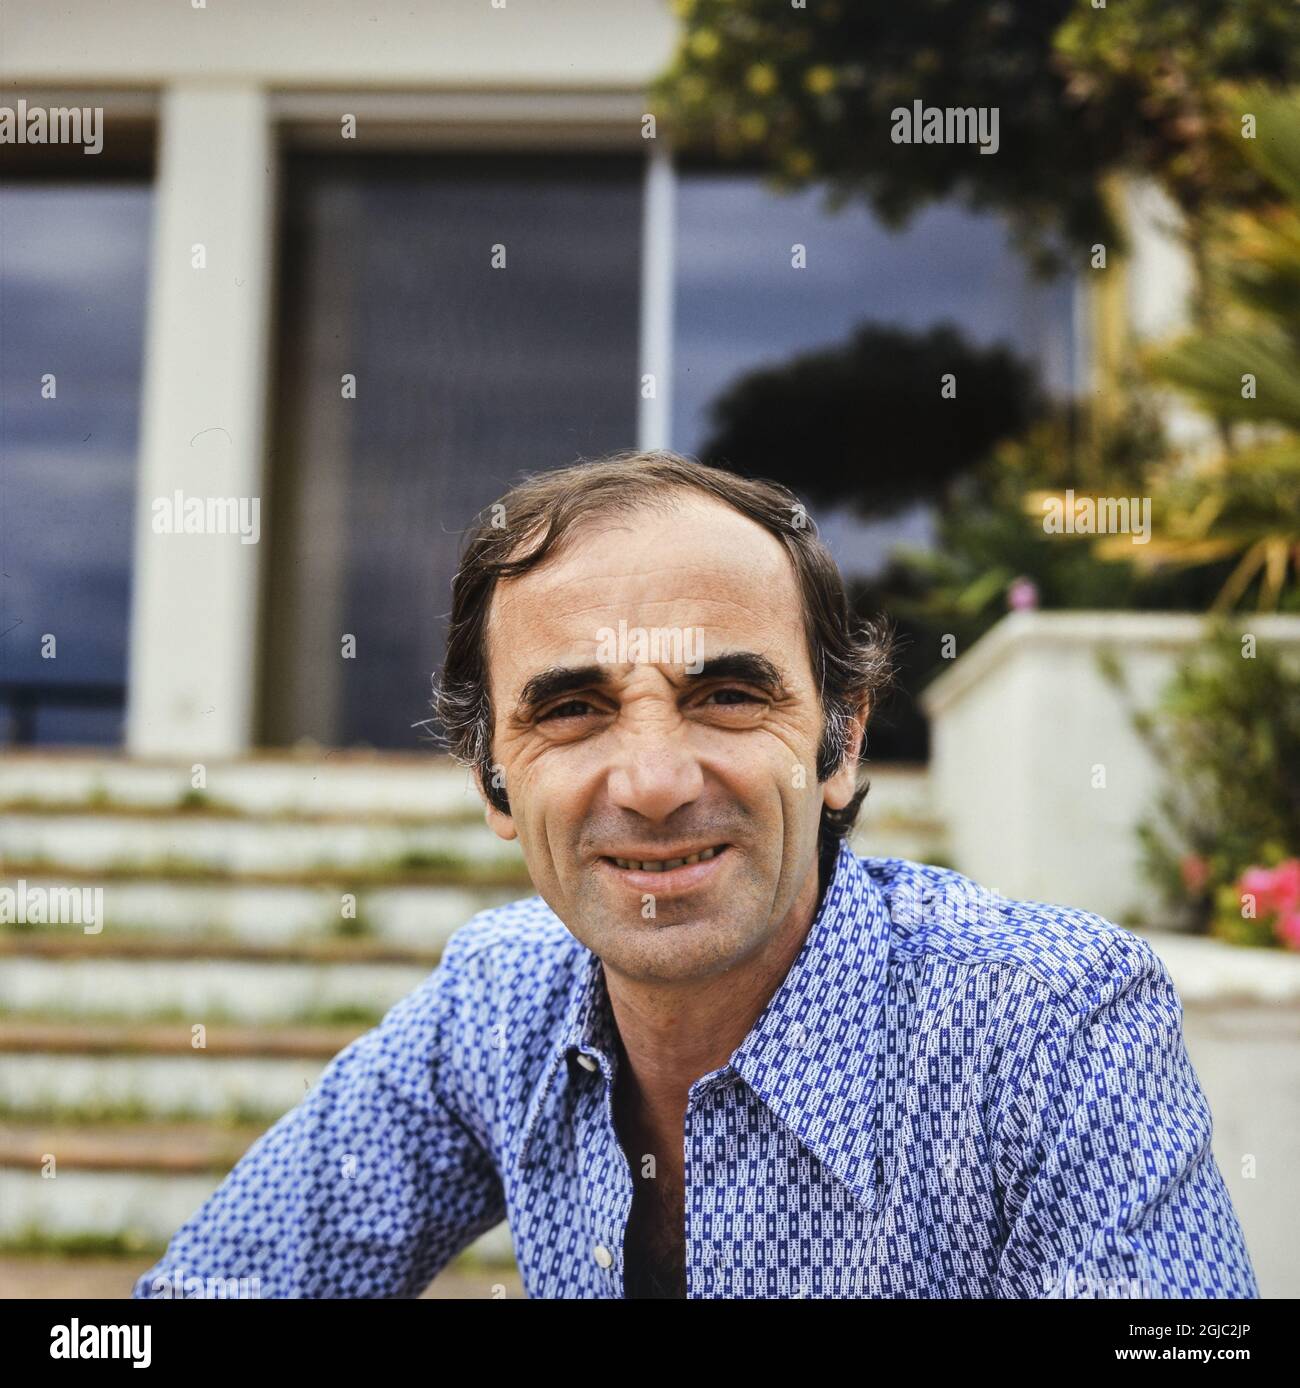 CANNES 1973 French singer Charles Aznavour 1973 in Cannes, France. Photo: Kary Lasch / TT News Agency / Code 4520  Stock Photo